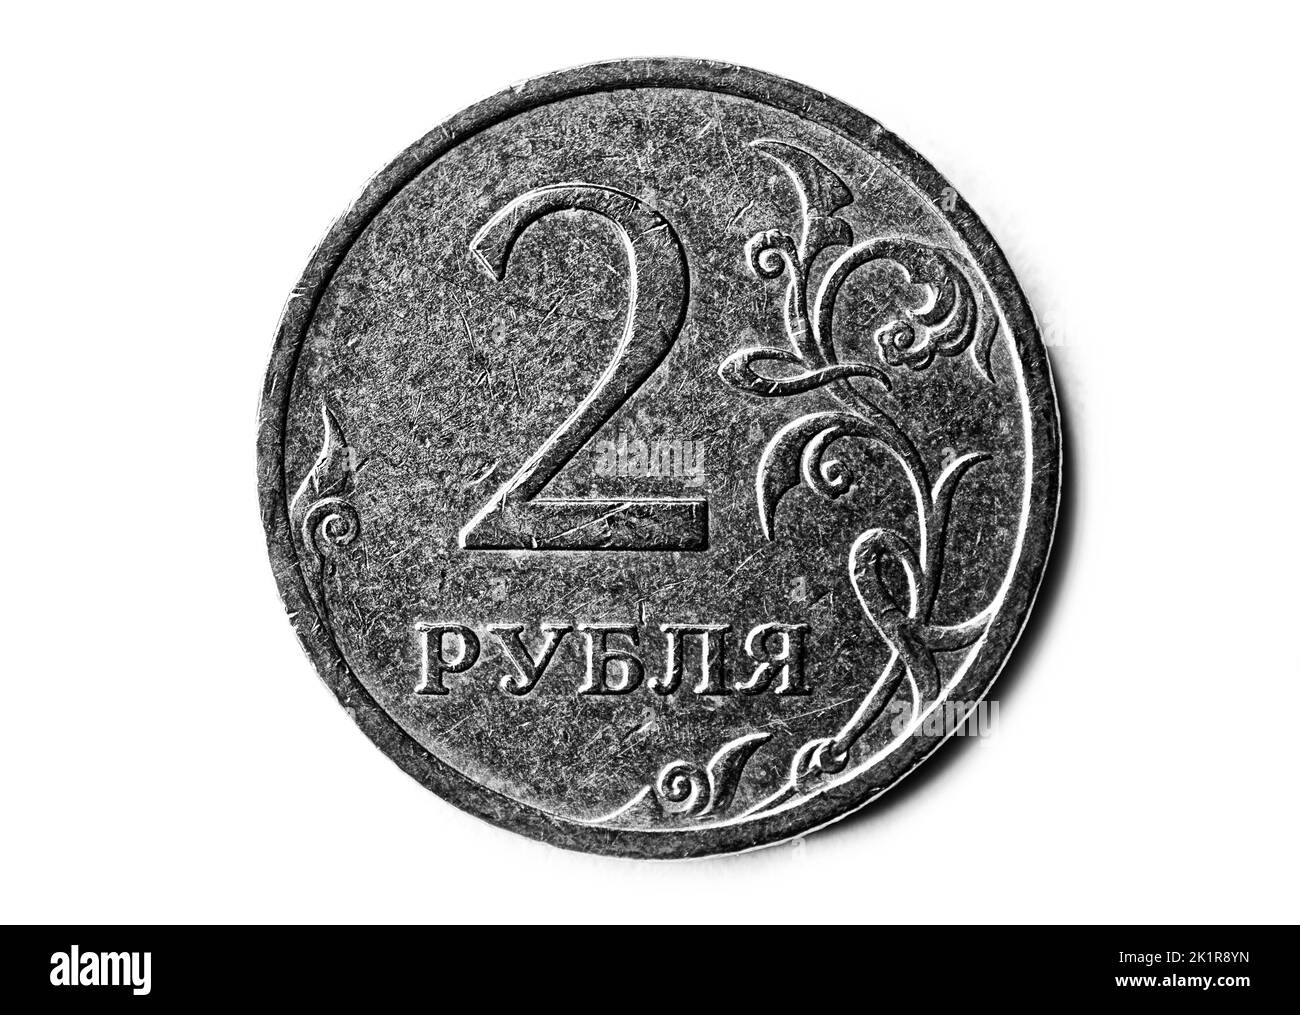 Photo coins Russia,2008,2 rubles Stock Photo